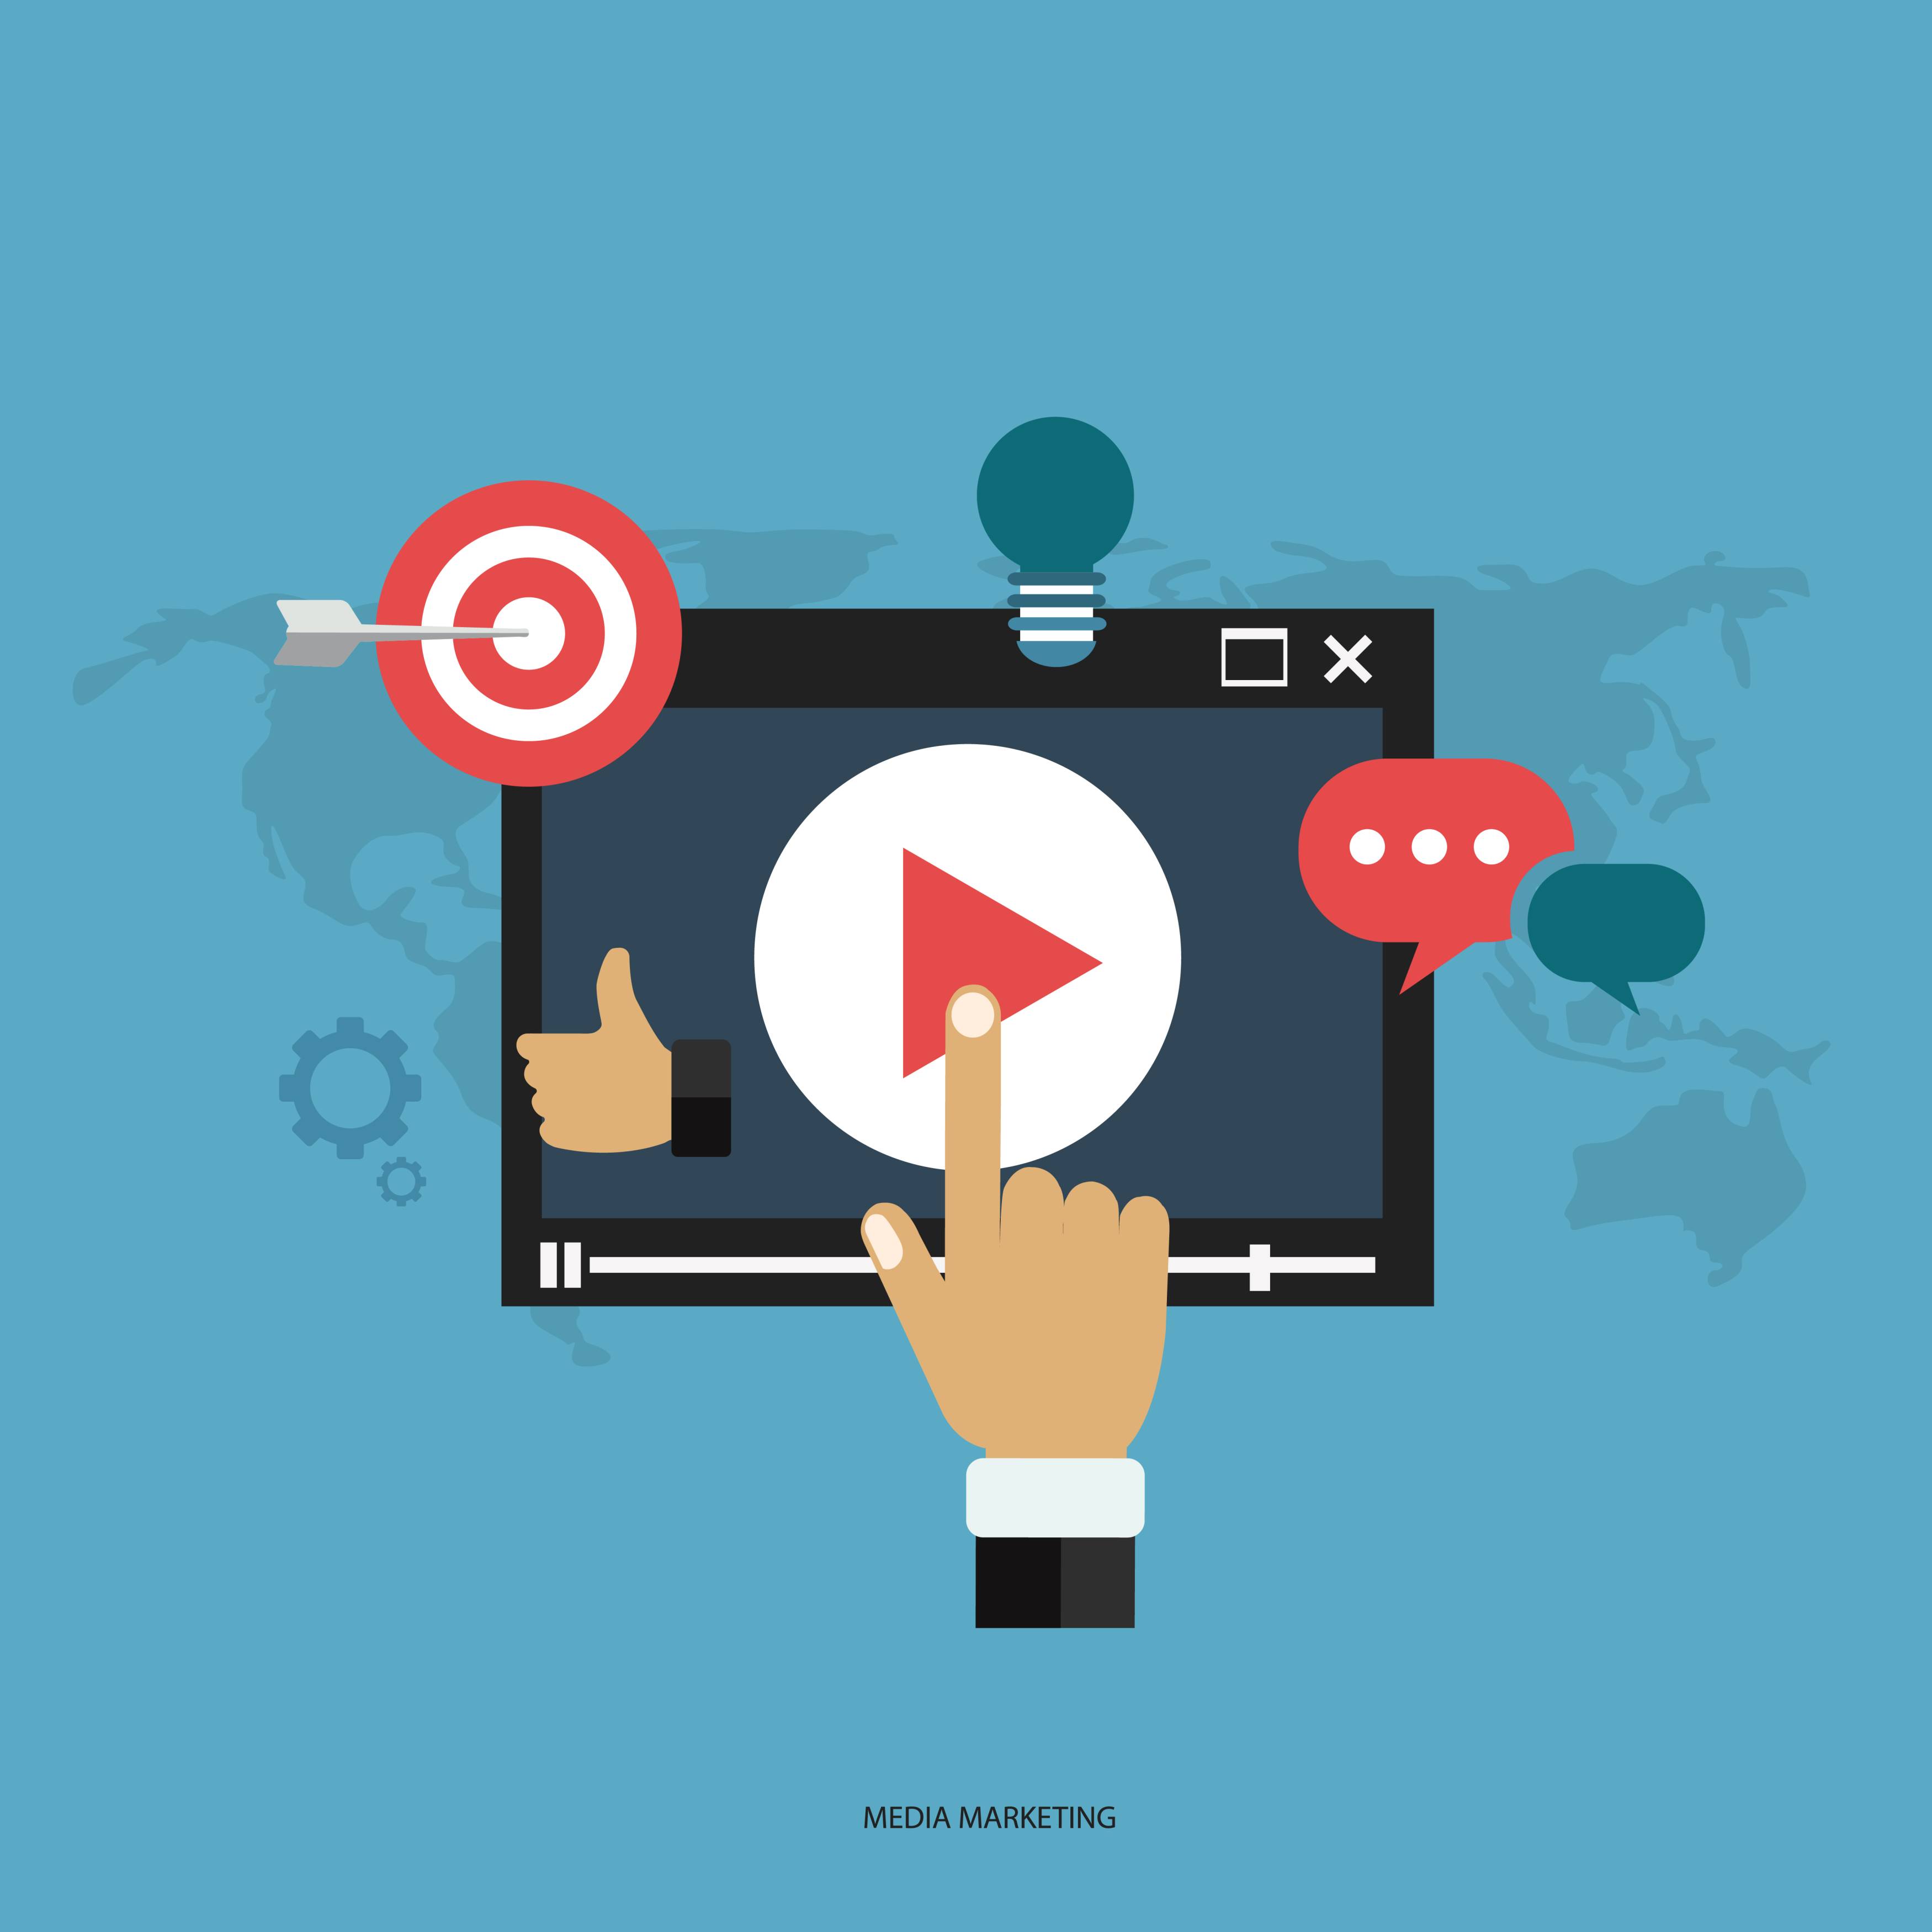 Youtube Advertising Agency, video marketing companies near me, Video Marketing Services in India, Video Marketing Company in India